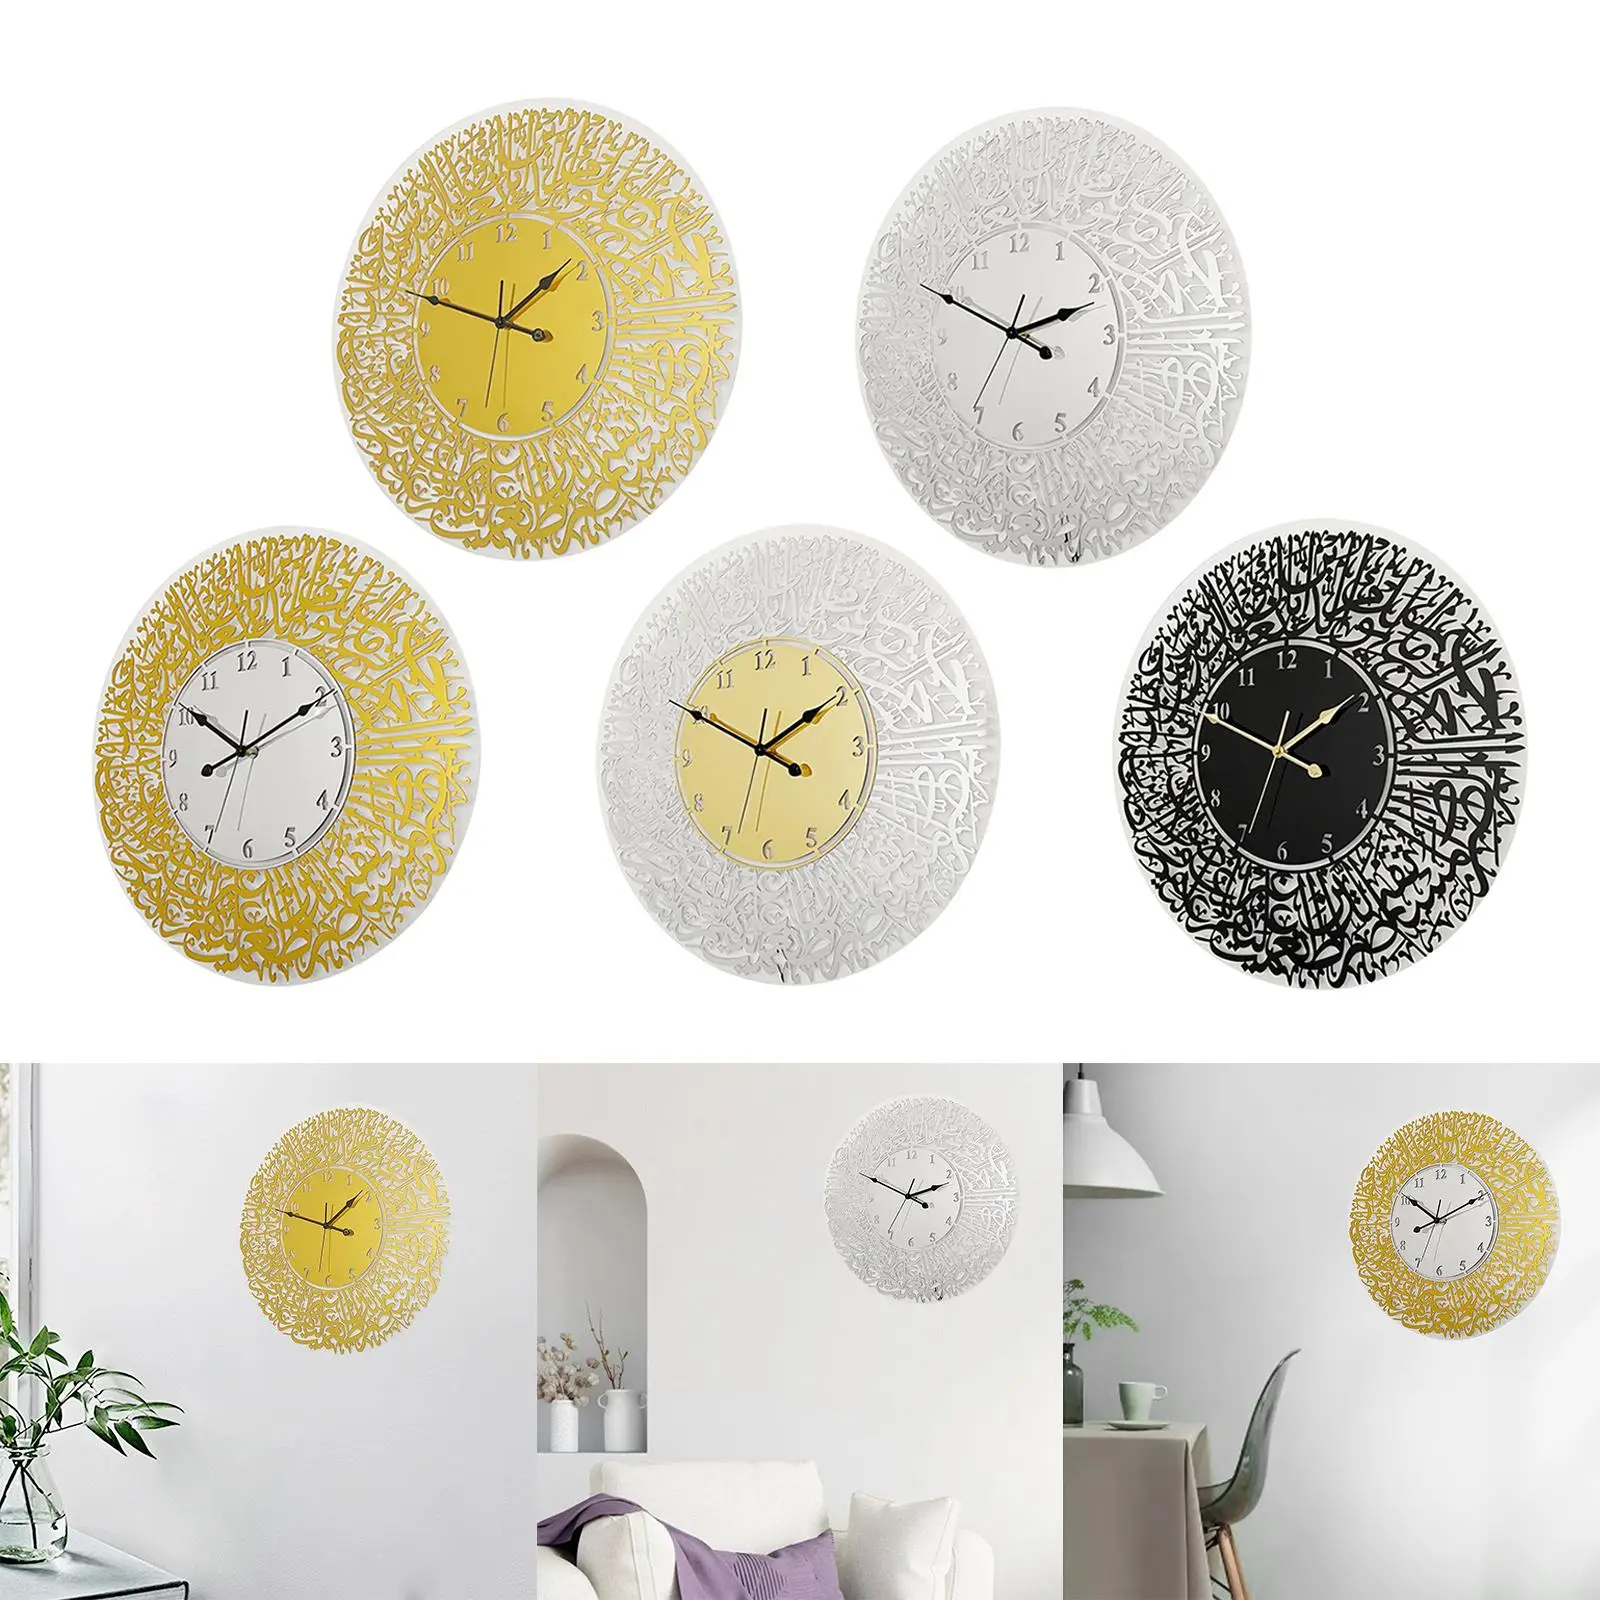 Vintage Style Islamic Wall Clock Muslim Non Ticking Sweeping Seconds 12 inch Clock for Living Room Bedroom Children Room Decor